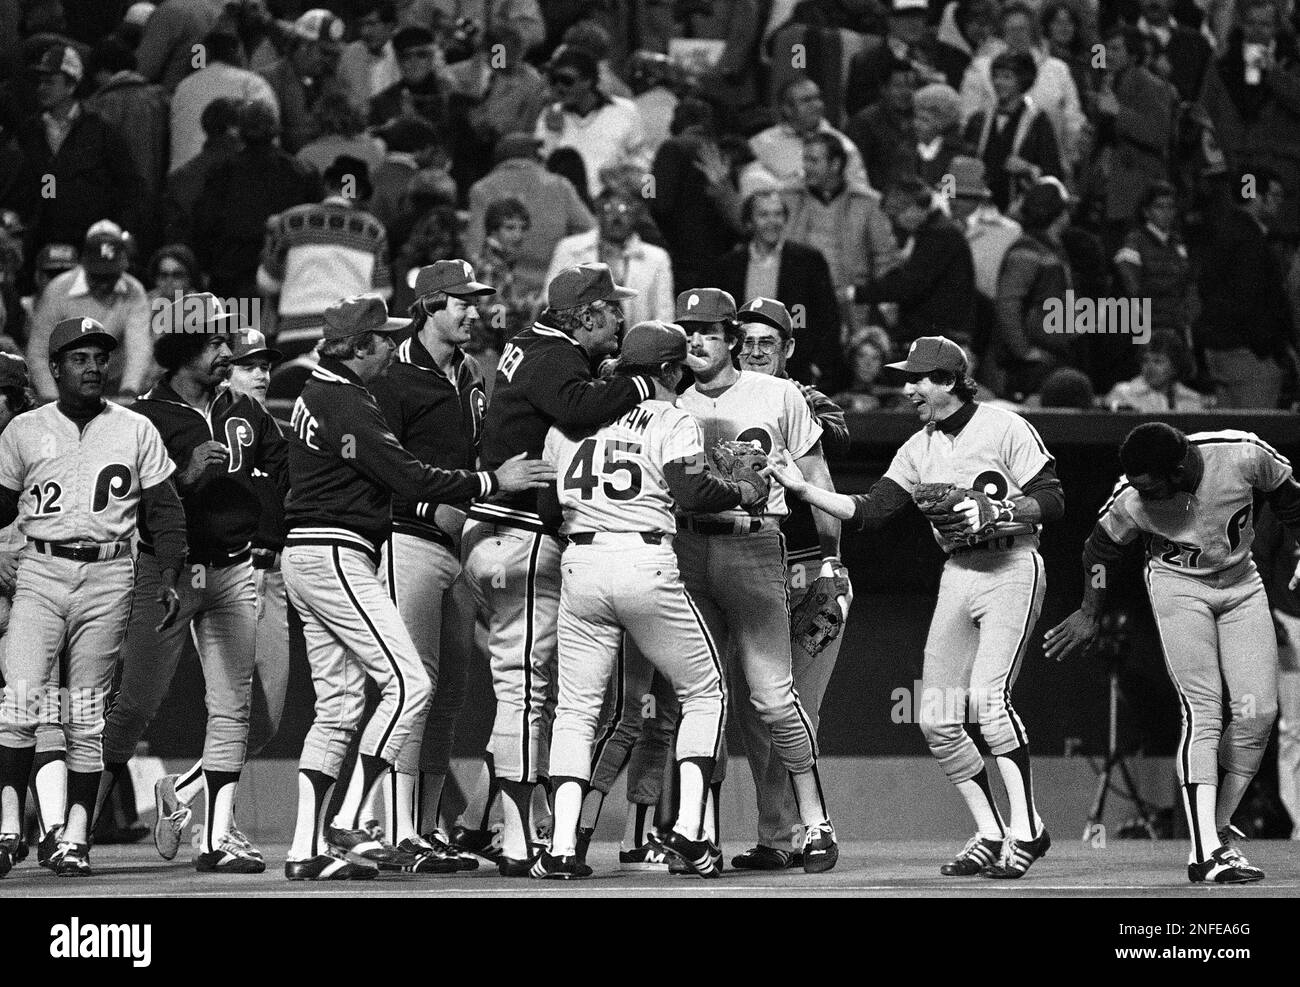 Philadelphia Phillies manager Dallas Green, center, puts his arm around  relief pitcher Tug McGraw (45) as shortstop Larry Bowa, right, comes out to  offer his congratulations after the Phillies won Sunday's World